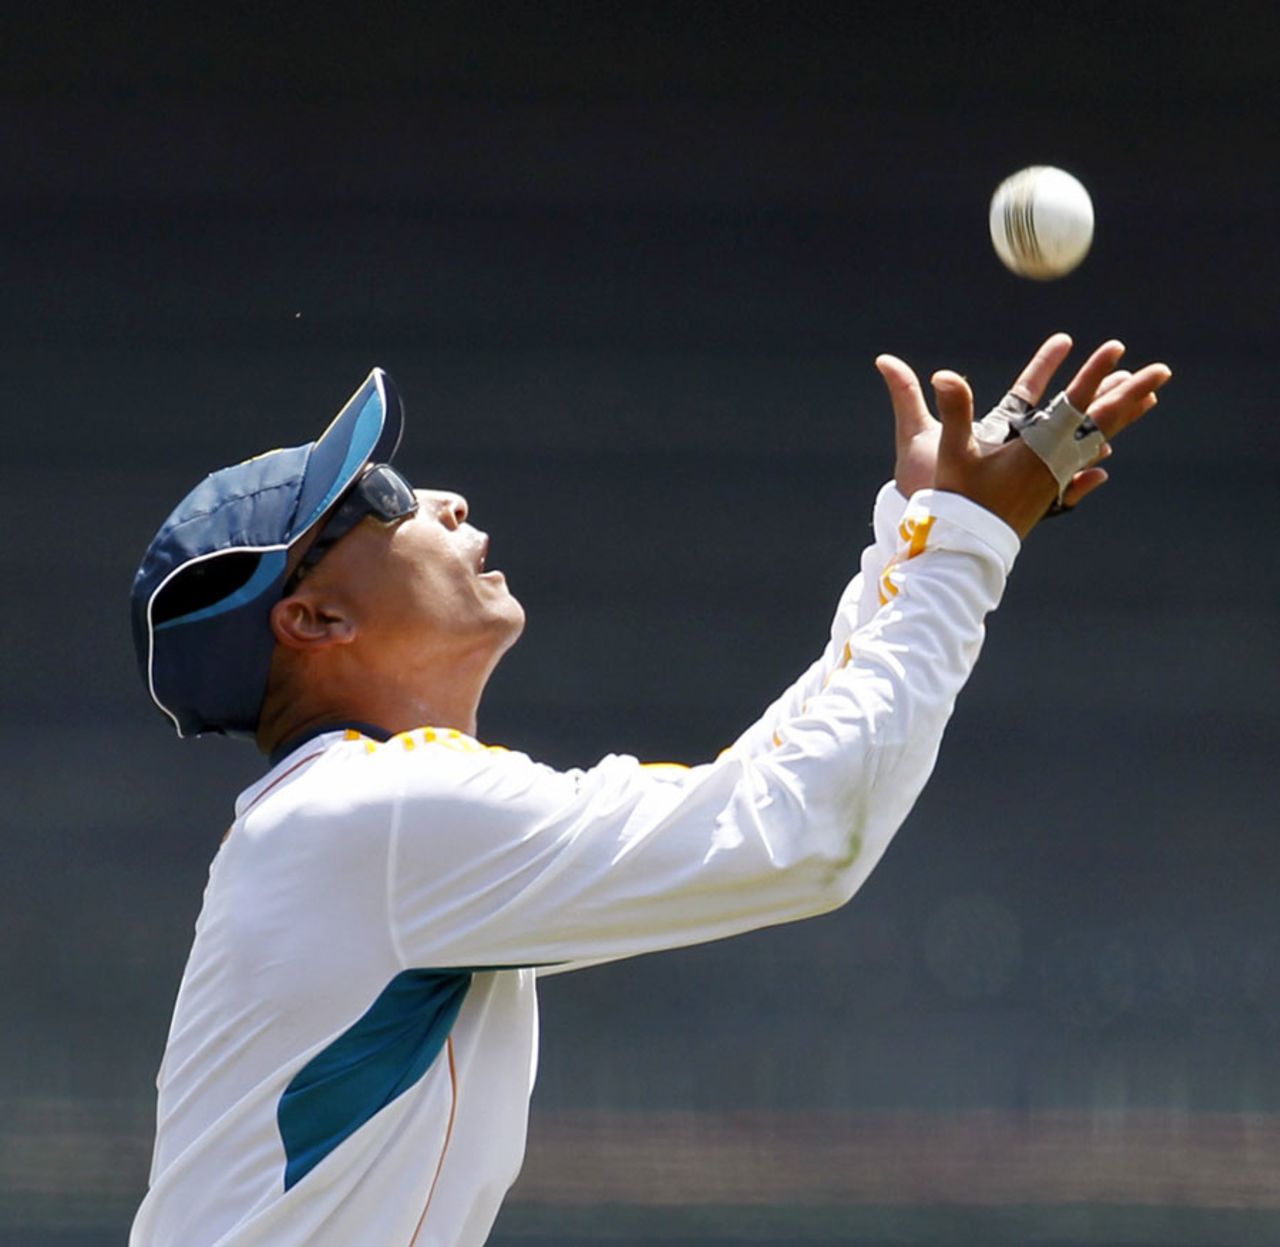 Henry Davids gets under a catch during a practice session, Colombo, July 30, 2013